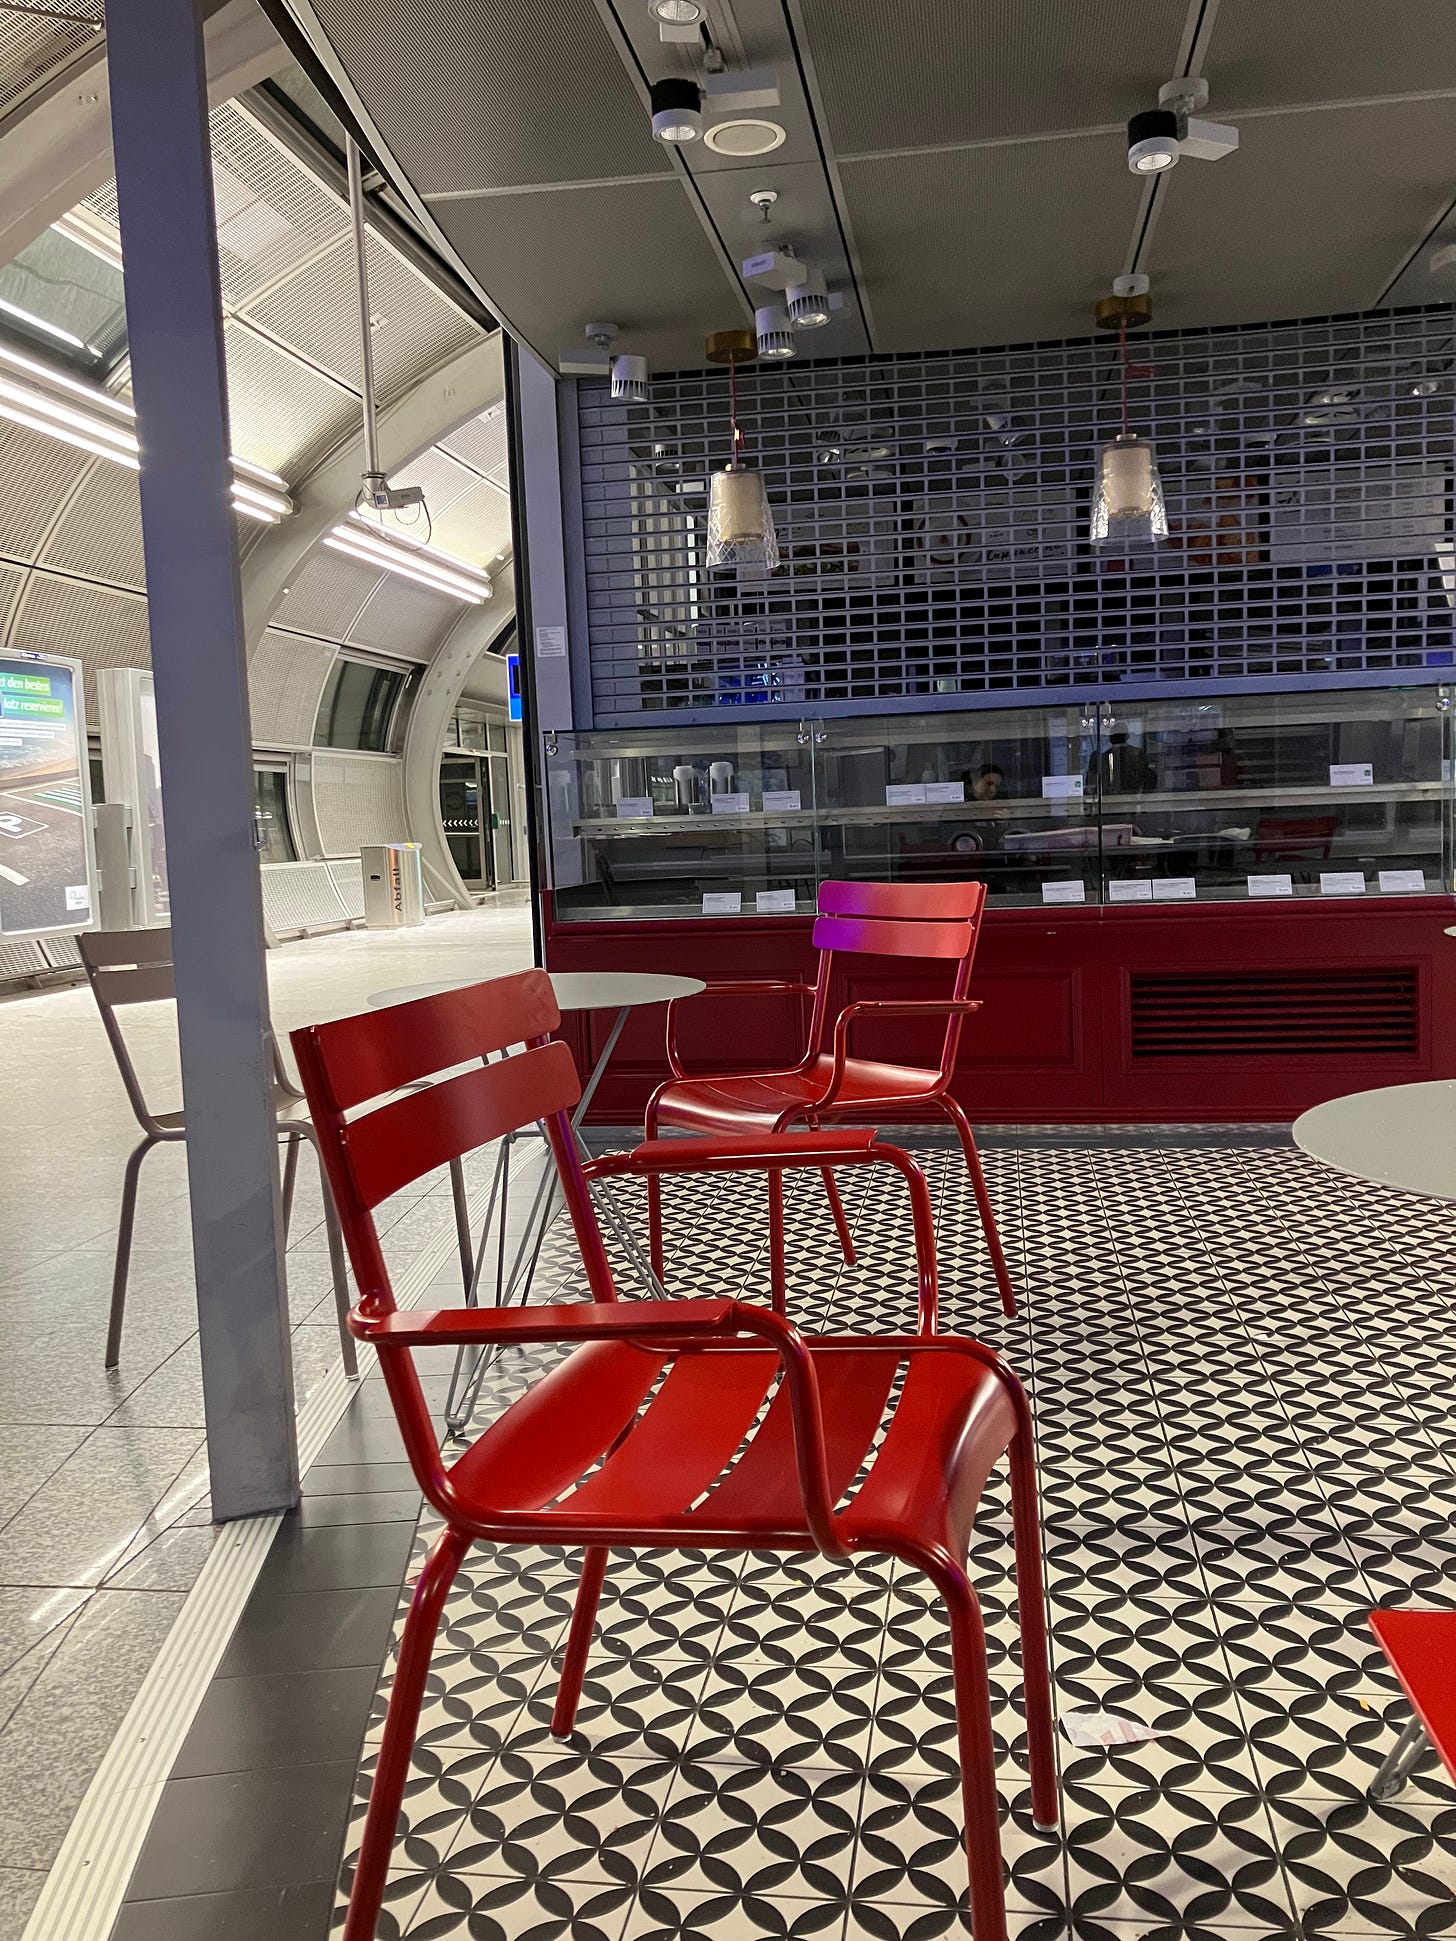 An airport corridor cafe with empty red chairs at empty round tables and the shutter down over the serving hatch.